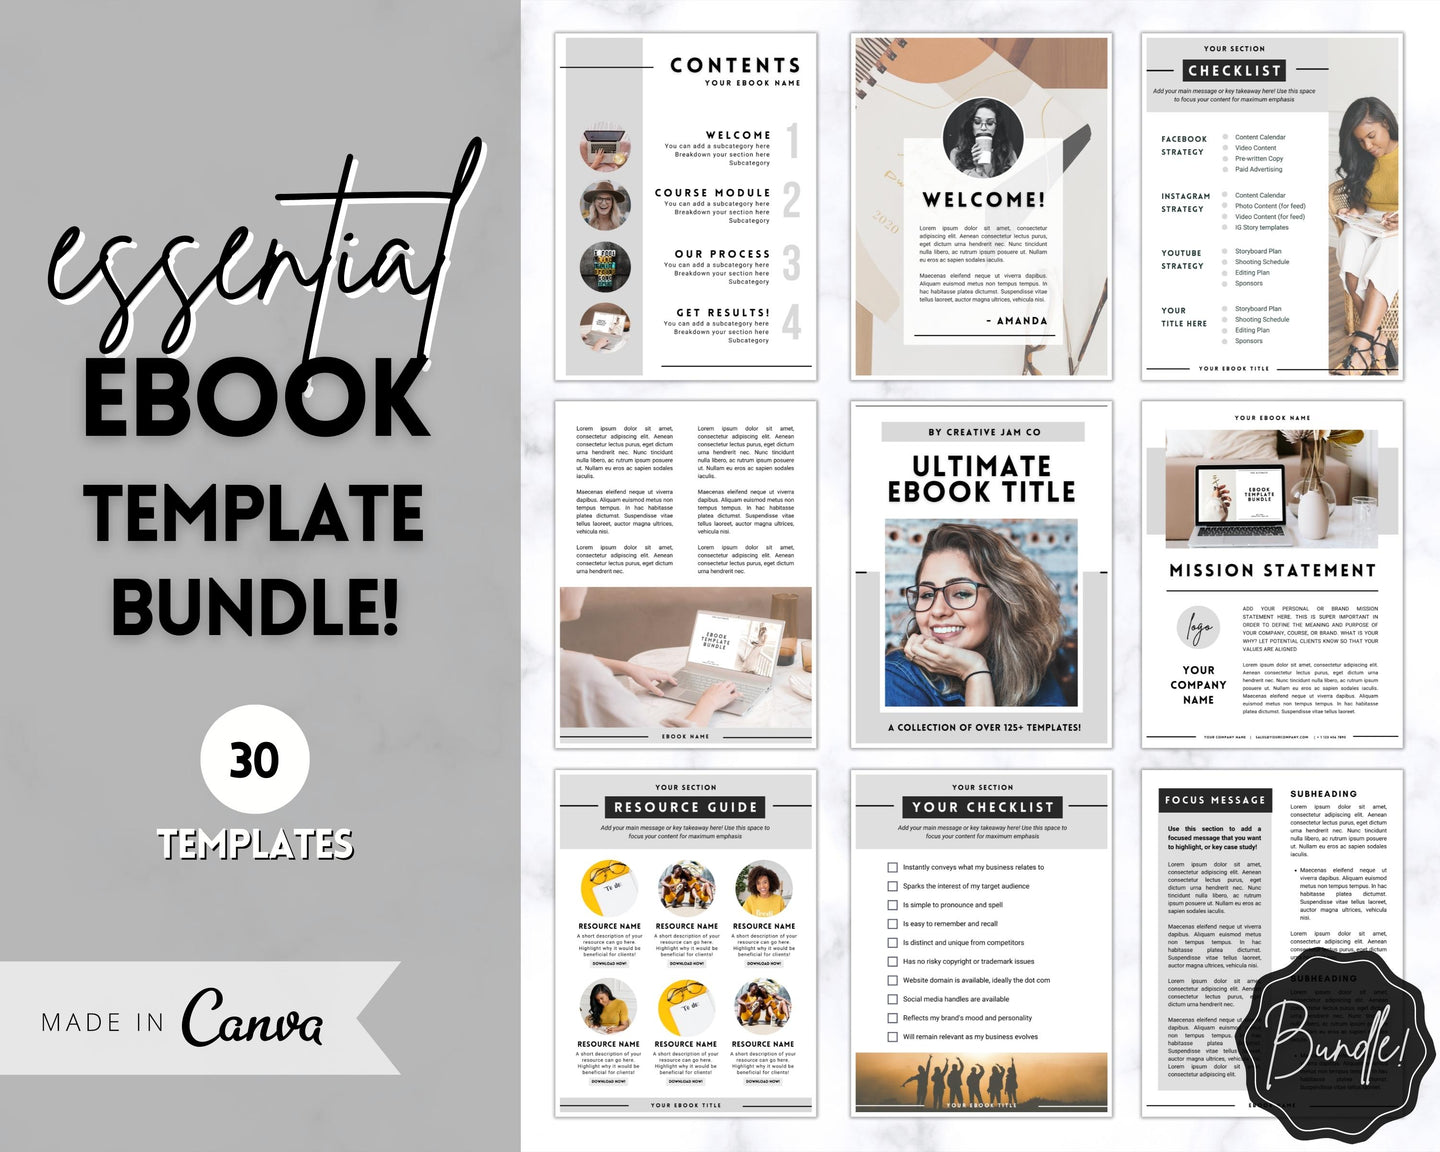 30+ eBook Essentials Template Canva | Workbook, Worksheets & Lead Magnet for Coaches & Bloggers | Brit Mono